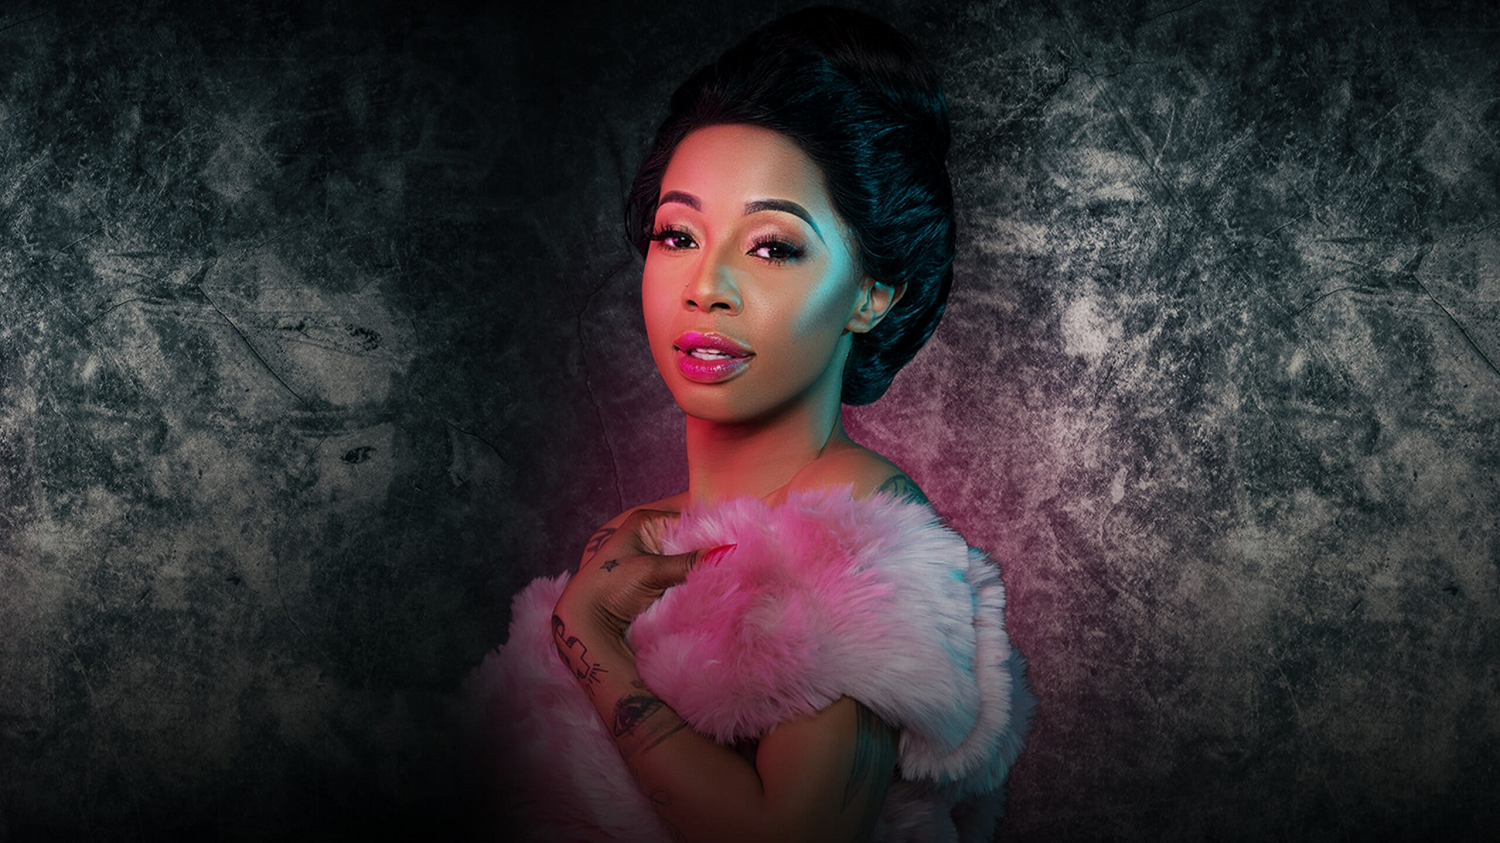 Kelly Khumalo in the age of Covid-19